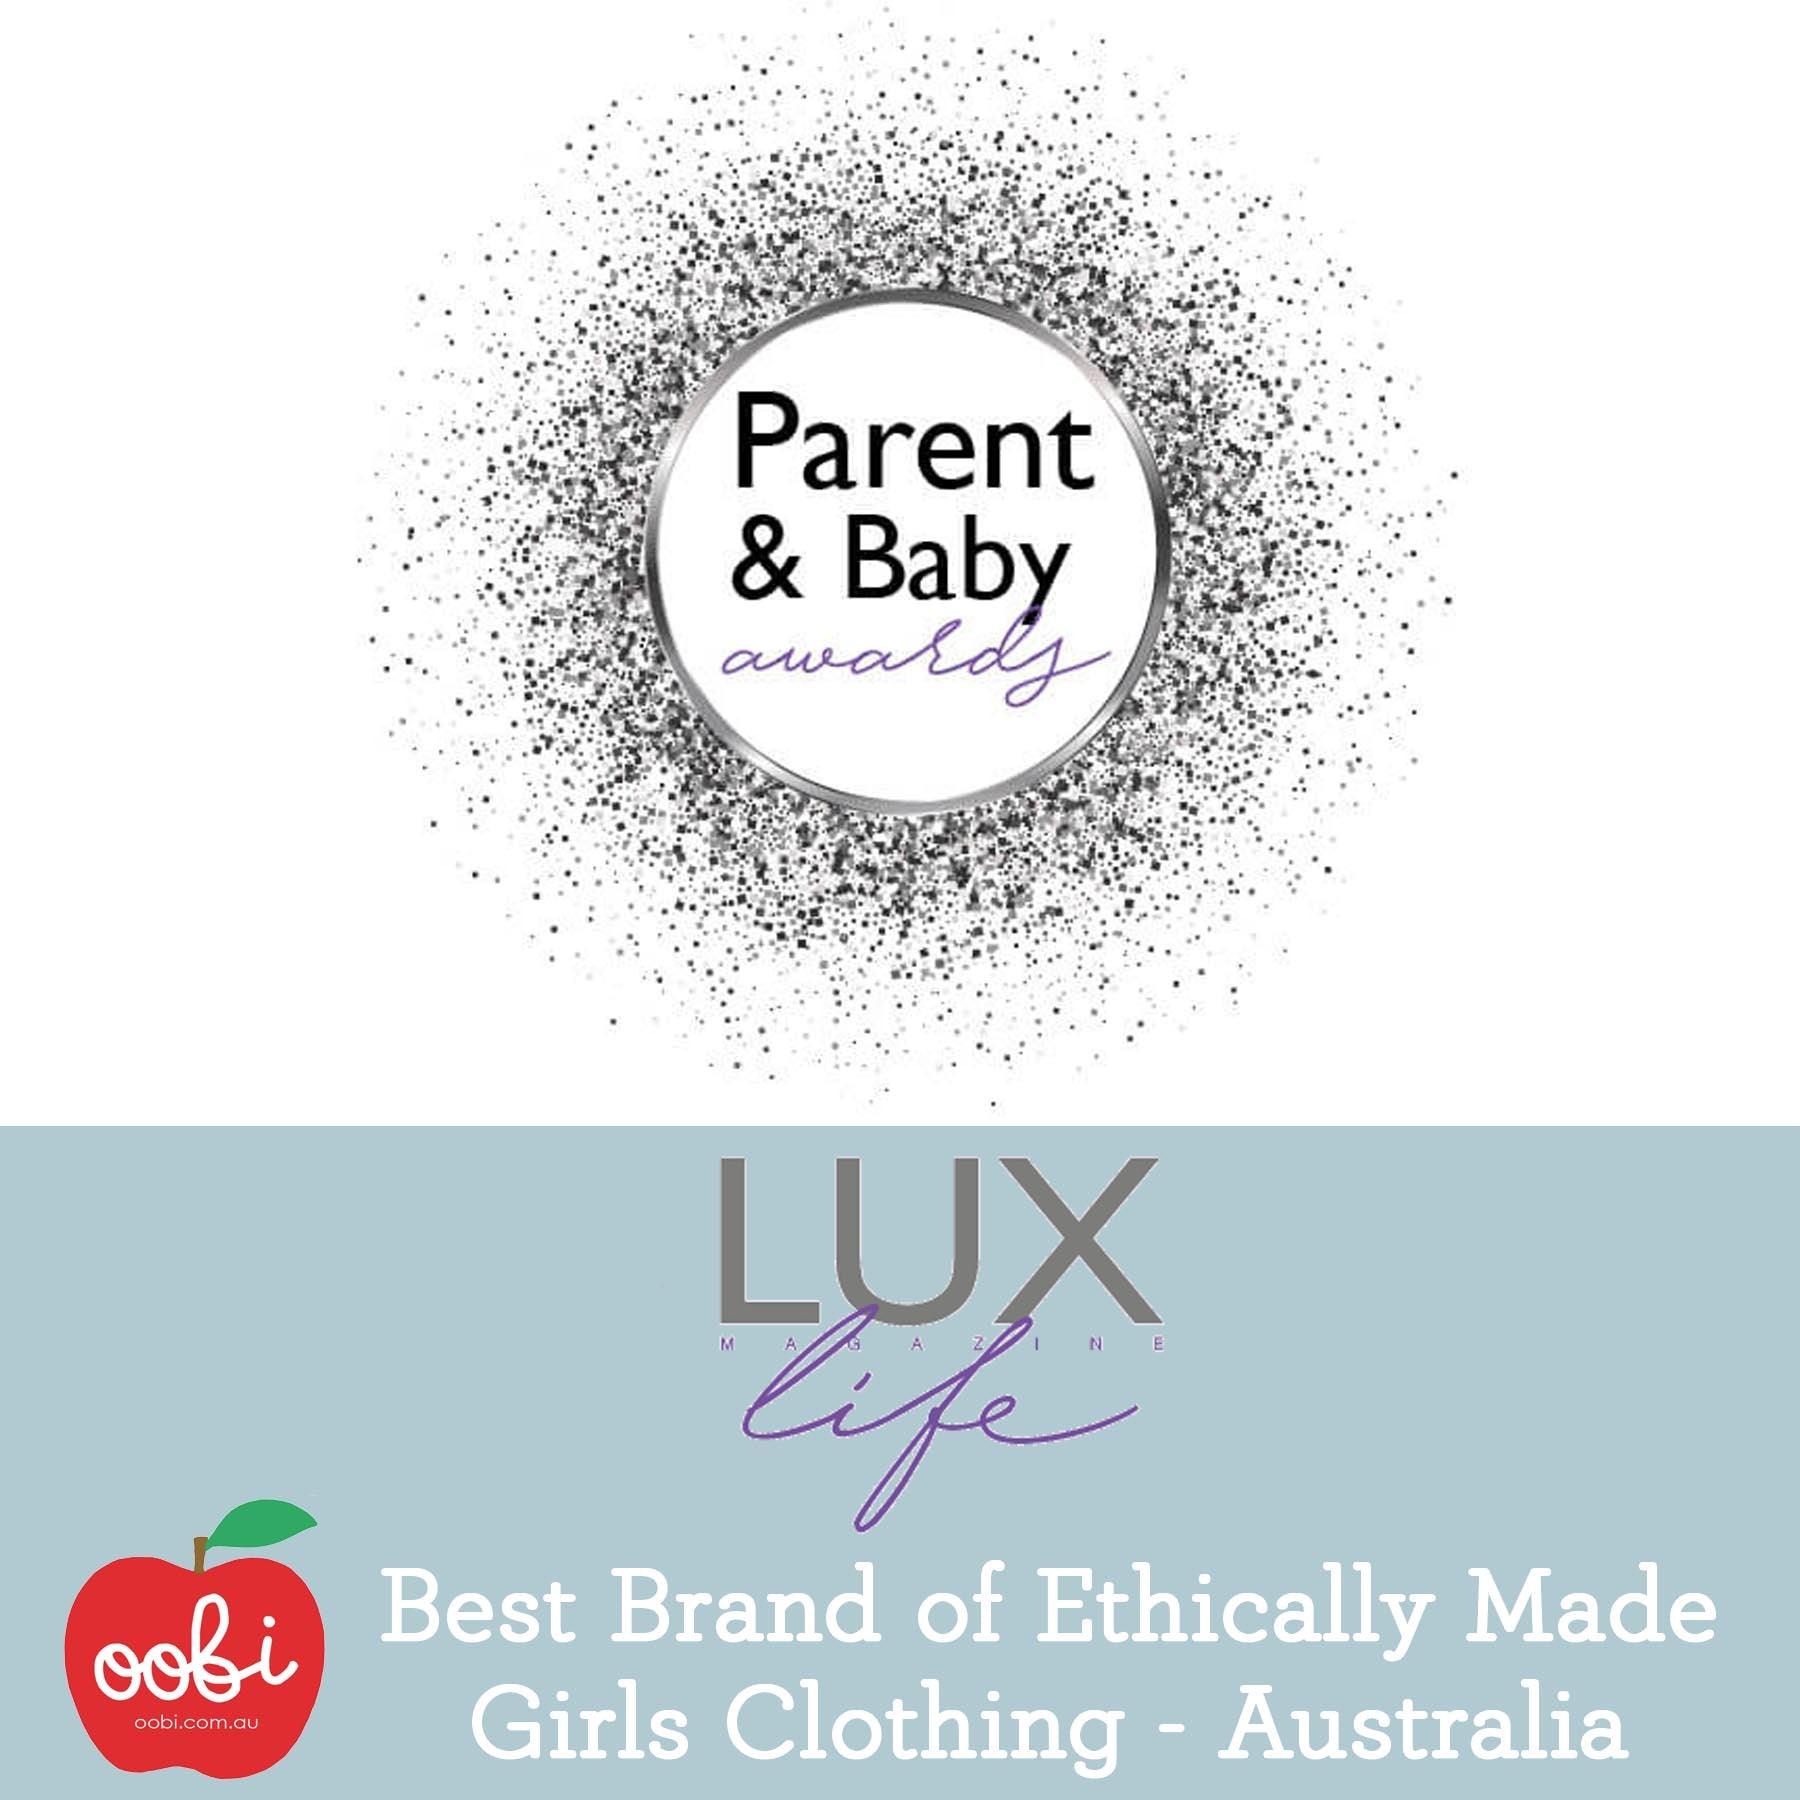 Parent & Baby Awards WINNER! Best Brand of Ethically Made Clothing!